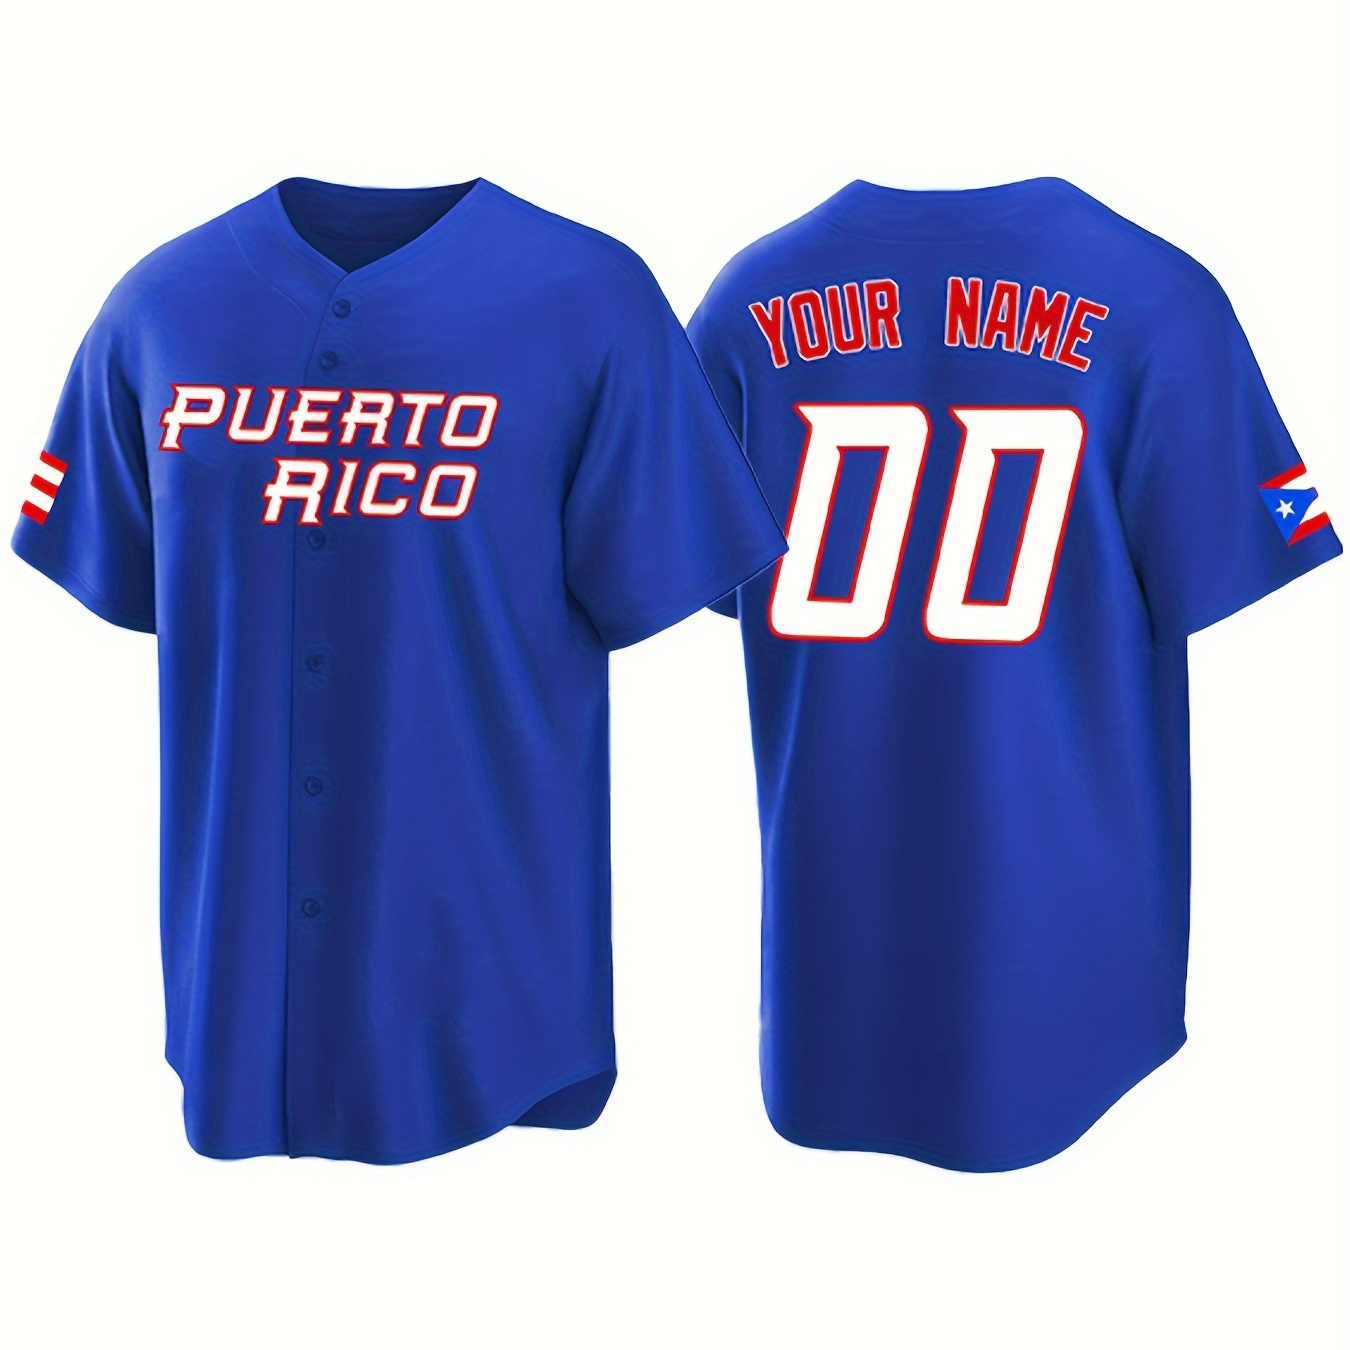 

Customized Name And Number Design, Men's Puerto Rico Embroidery Design Short Sleeve Loose Breathable V-neck Baseball Jersey, Sports Shirt For Team Training